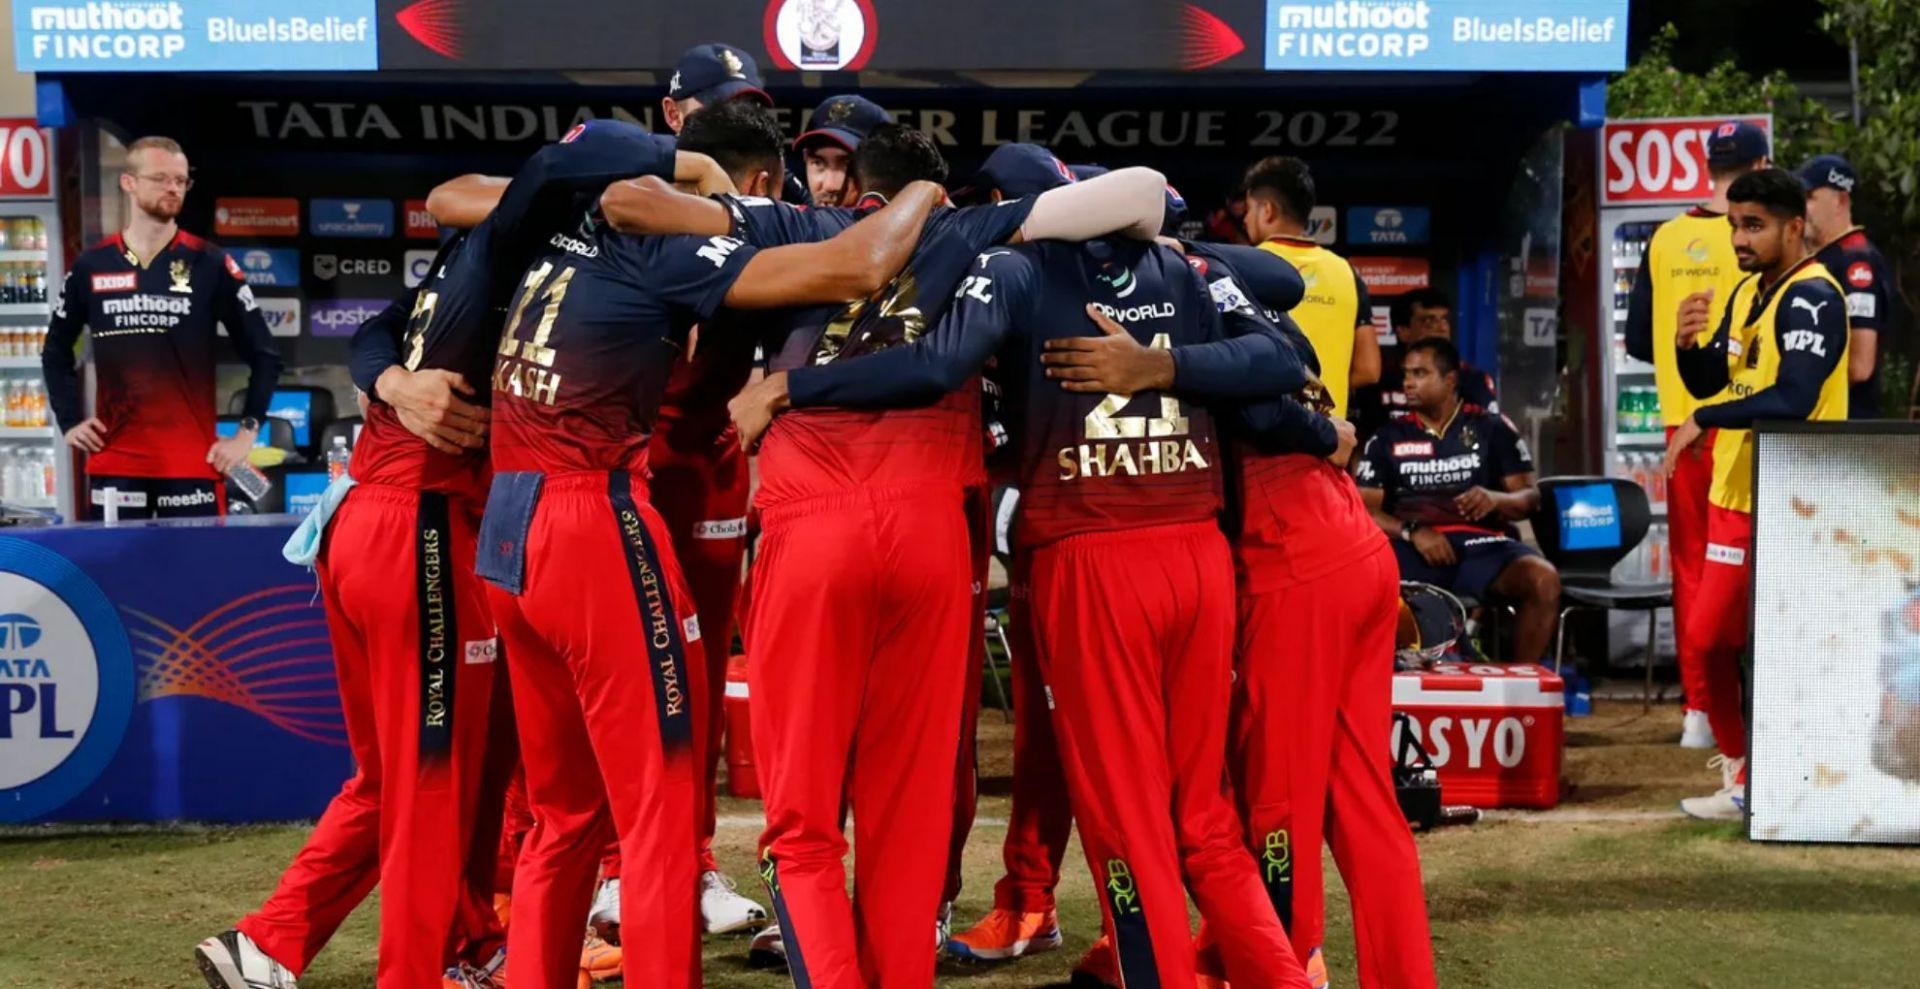 Royal Challengers Bangalore are currently fifth in the IPL 2022 points table (Credit: BCCI/IPL)